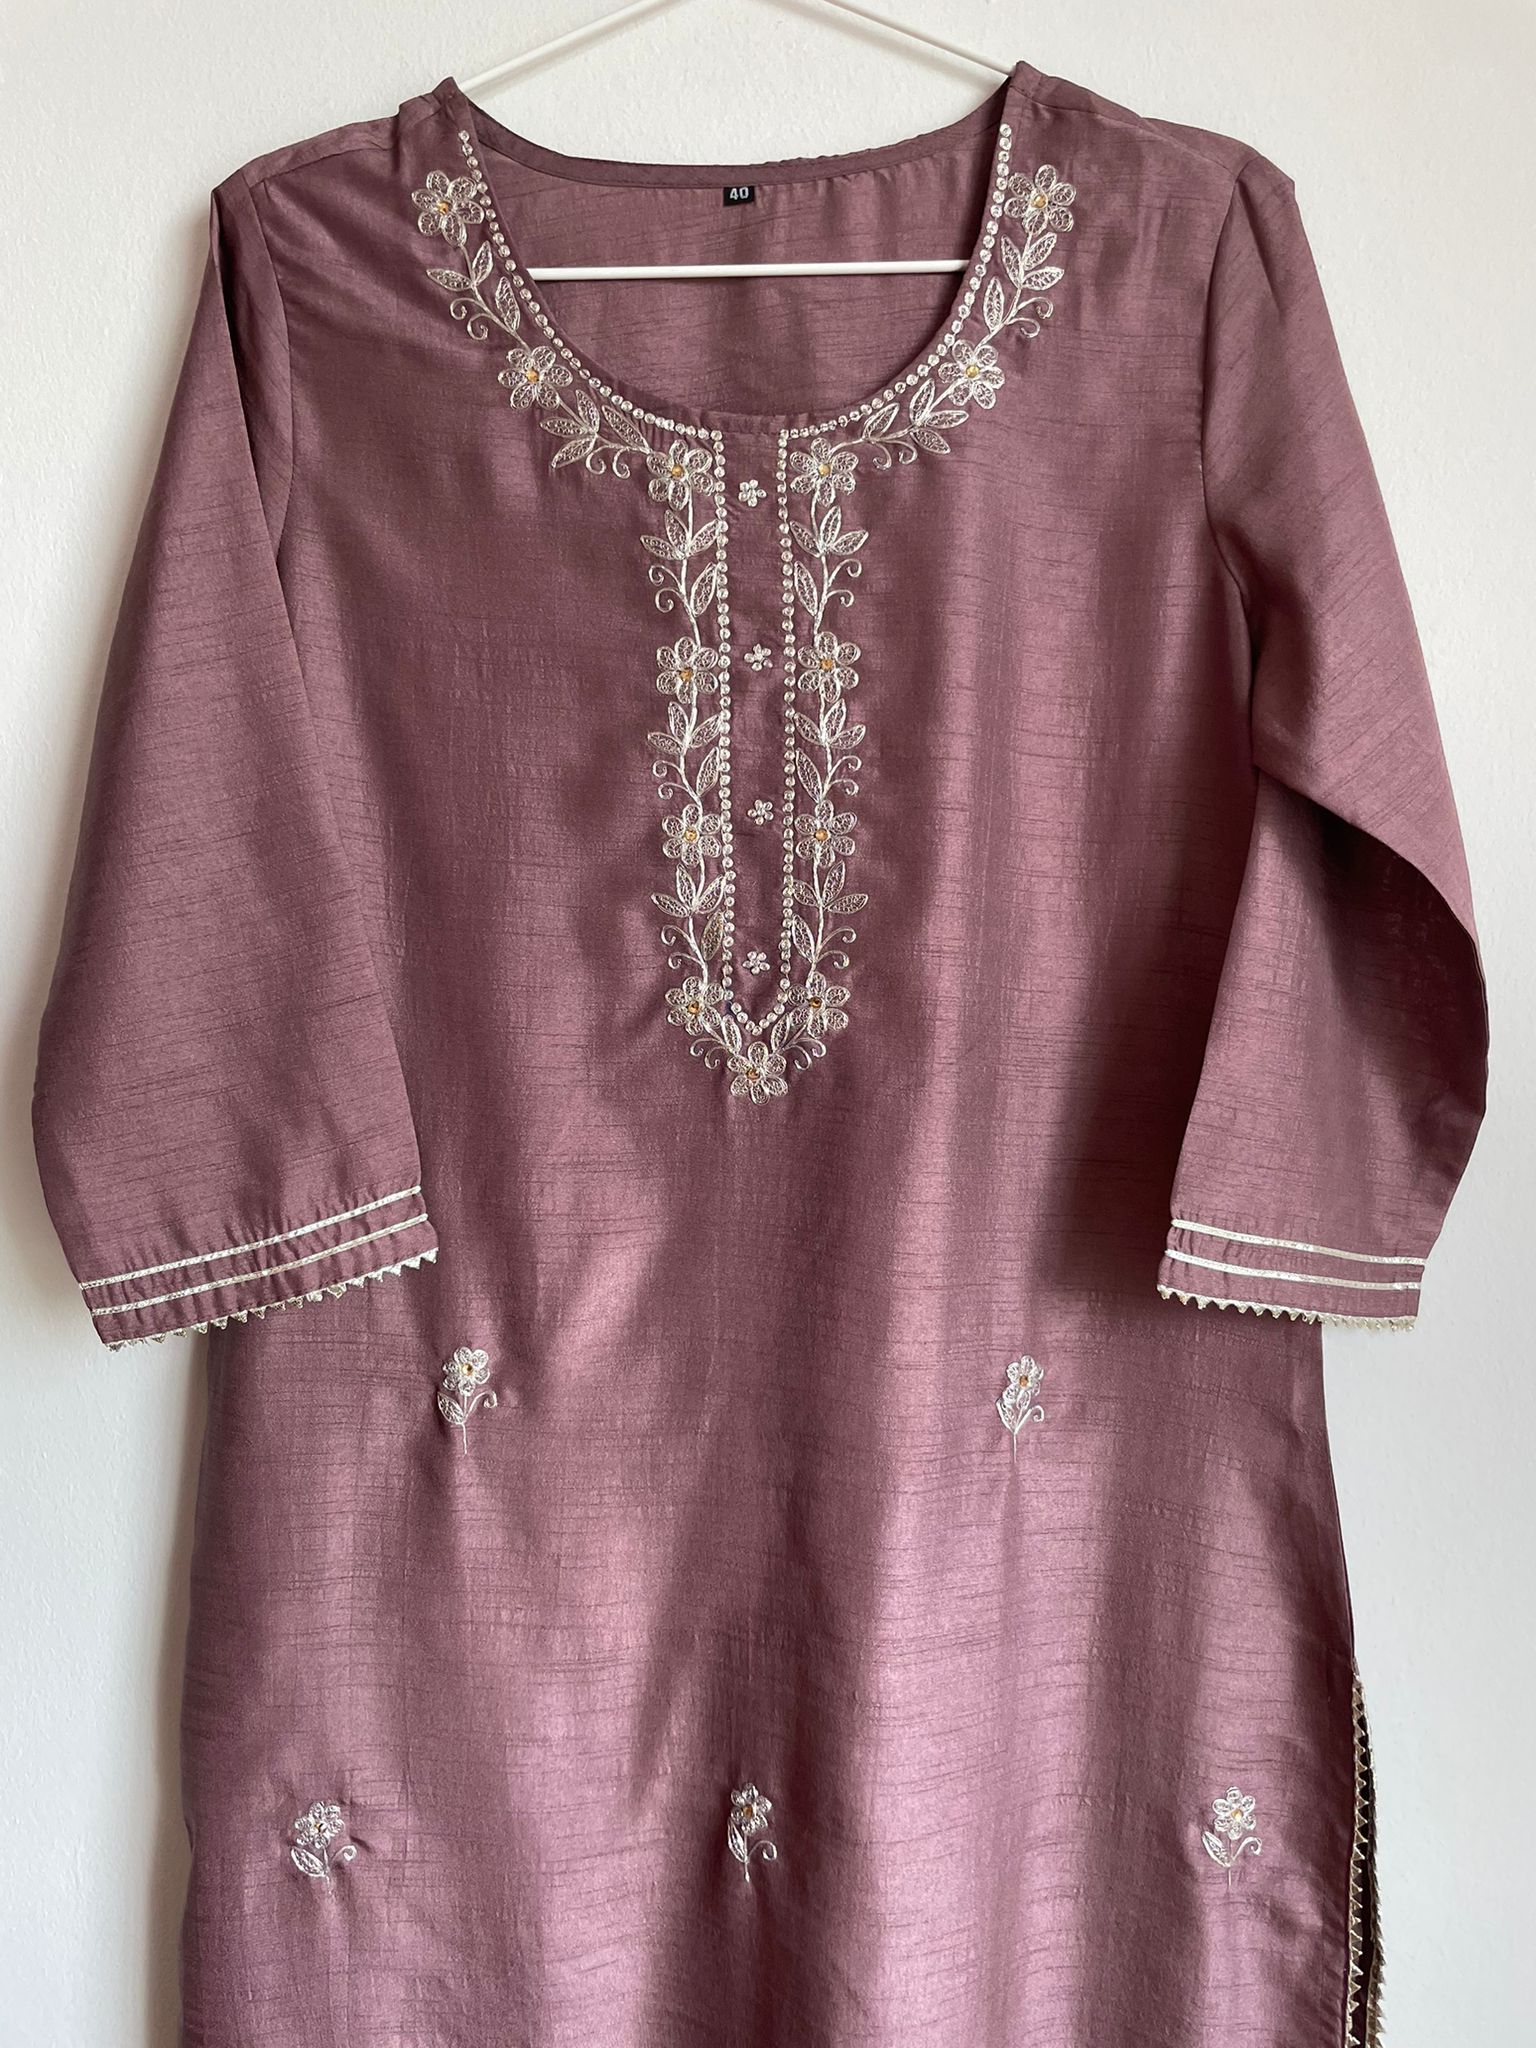 silver embroidery and brown suit for women